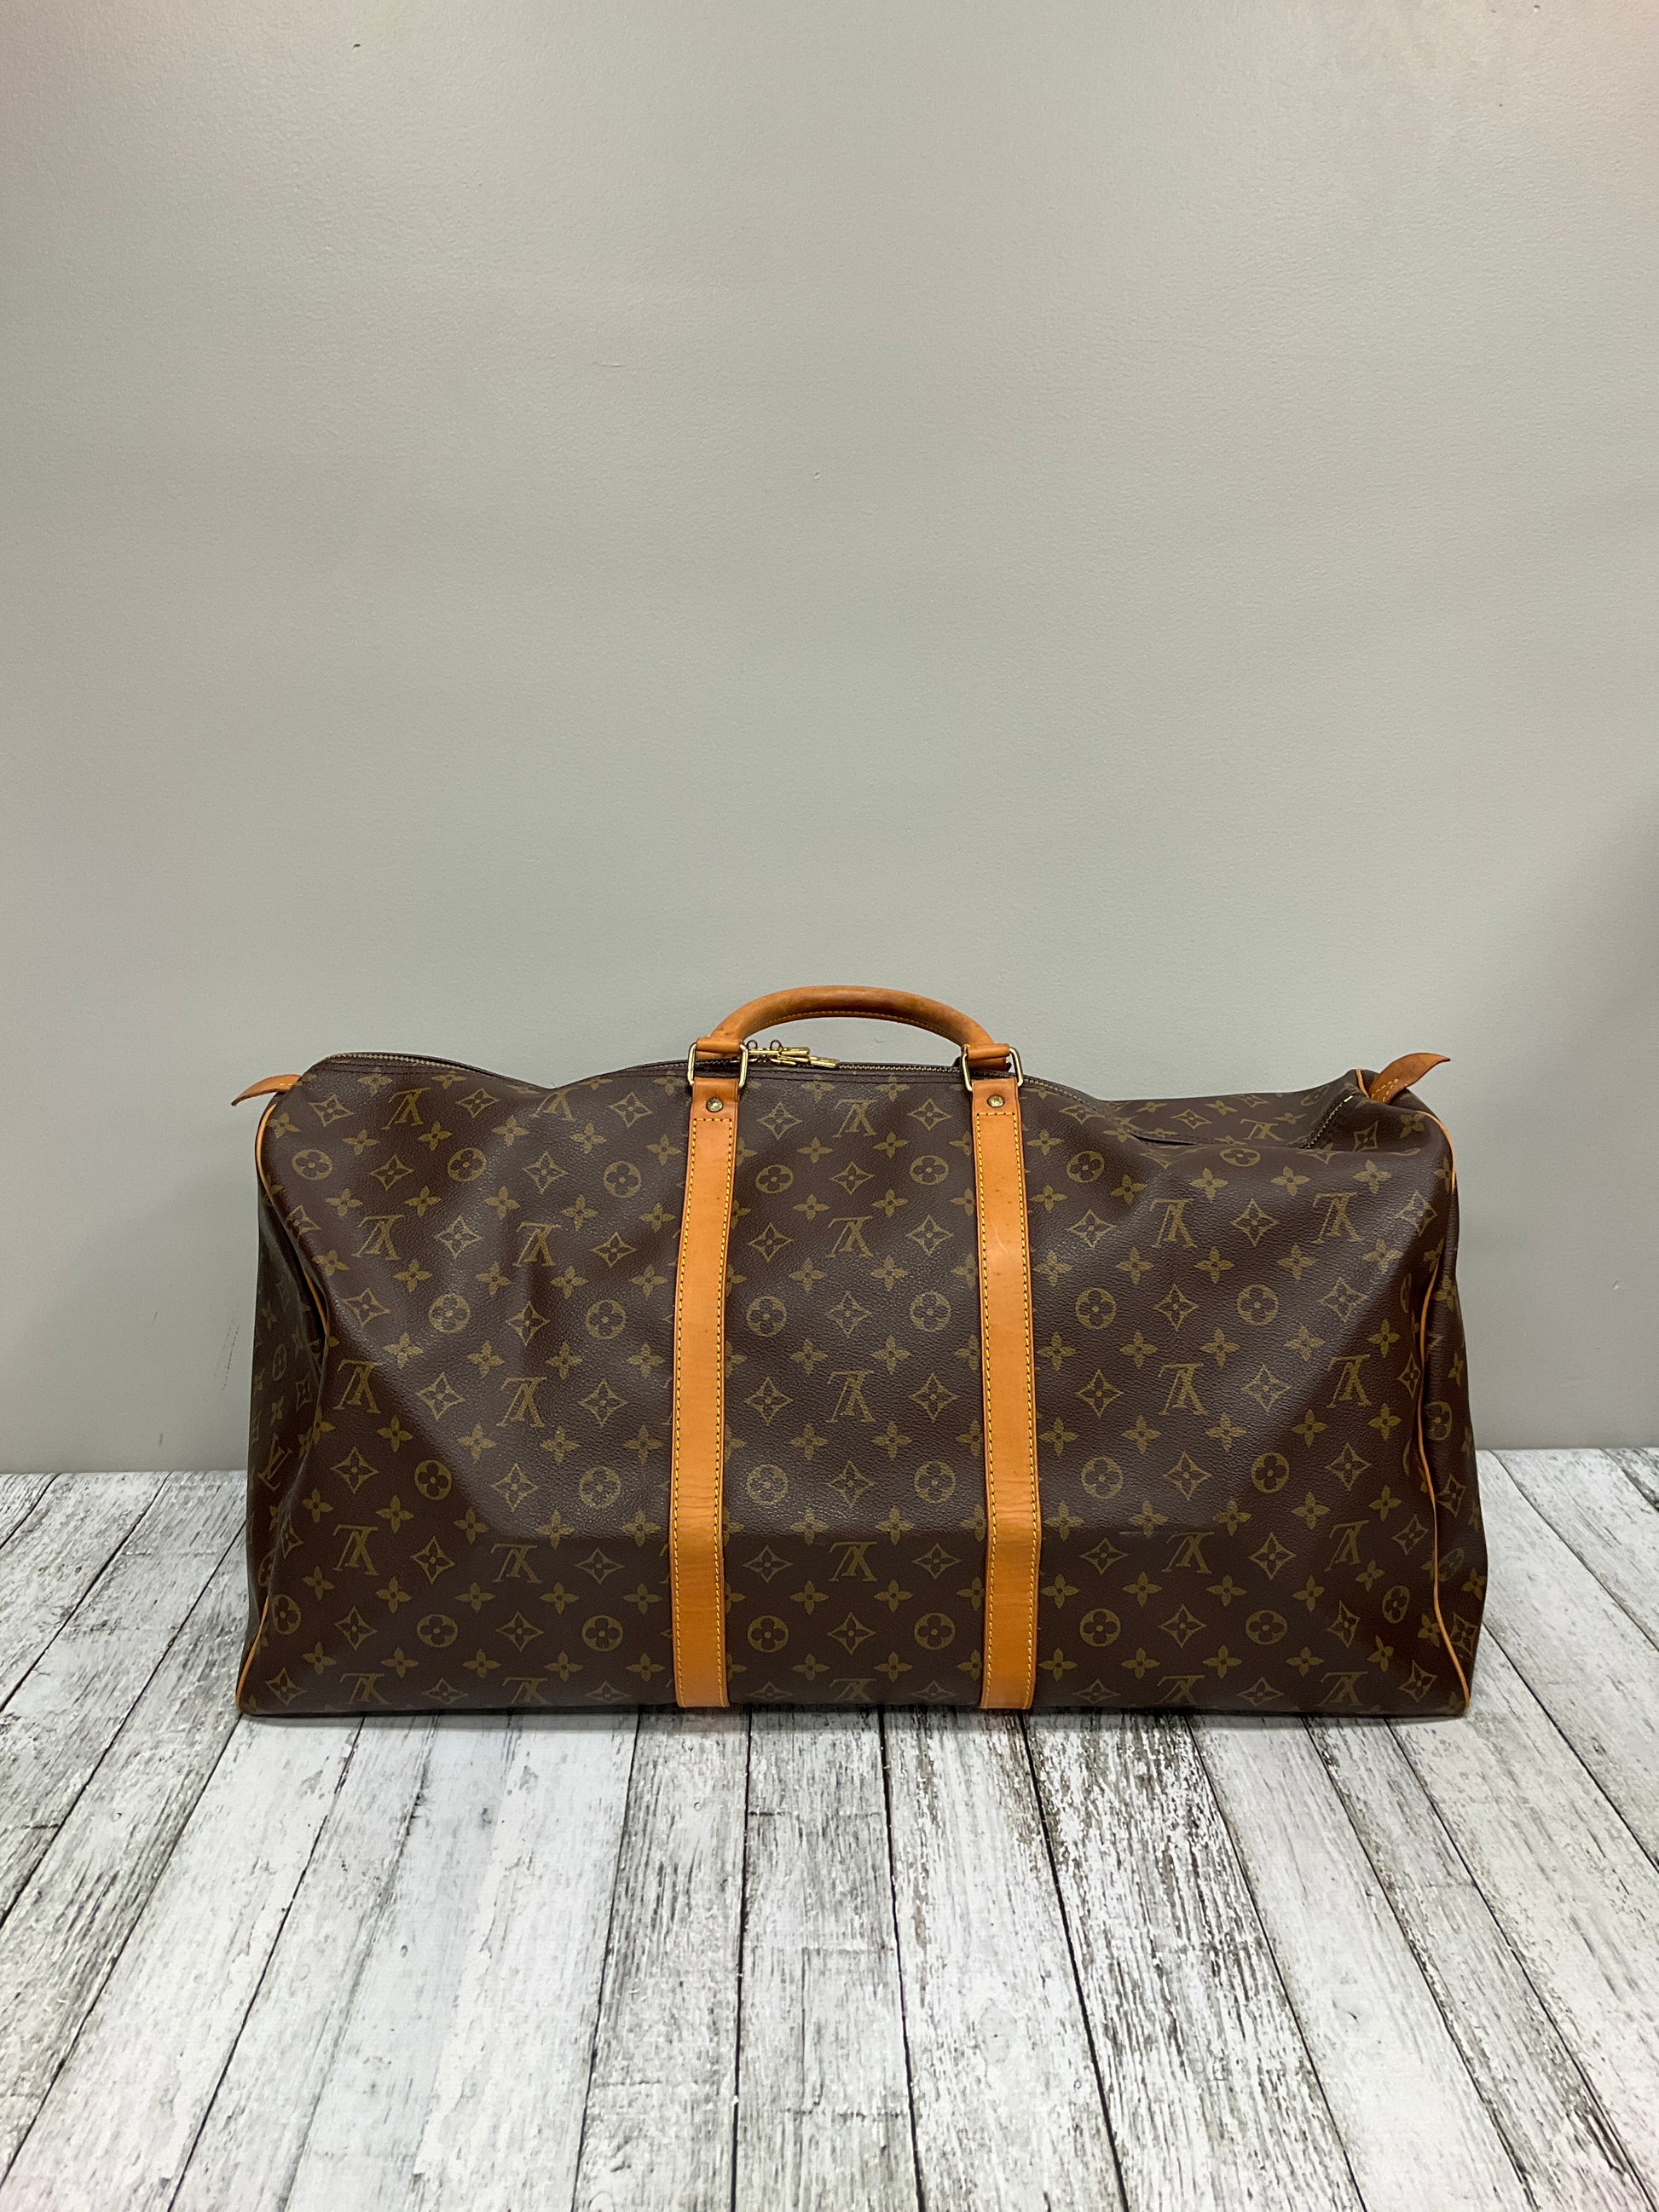 Duffle And Weekender Luxury Designer By Louis Vuitton Size: Large